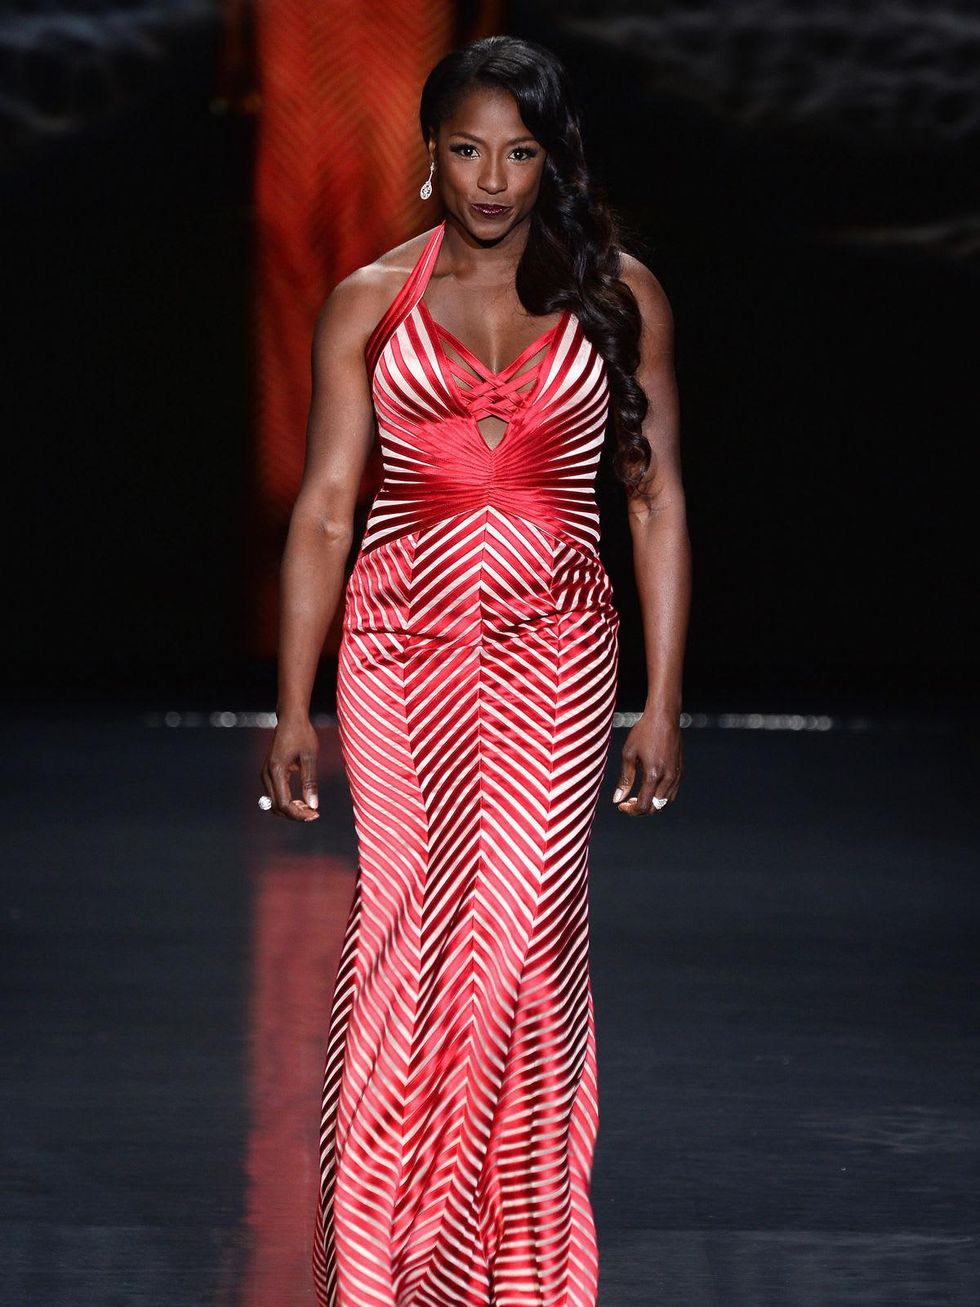 Actress Rutina Wesley, wearing Max Azria, walks the runway at Go Red For Women - The Heart Truth Red Dress Collection 2014 Show February 2014